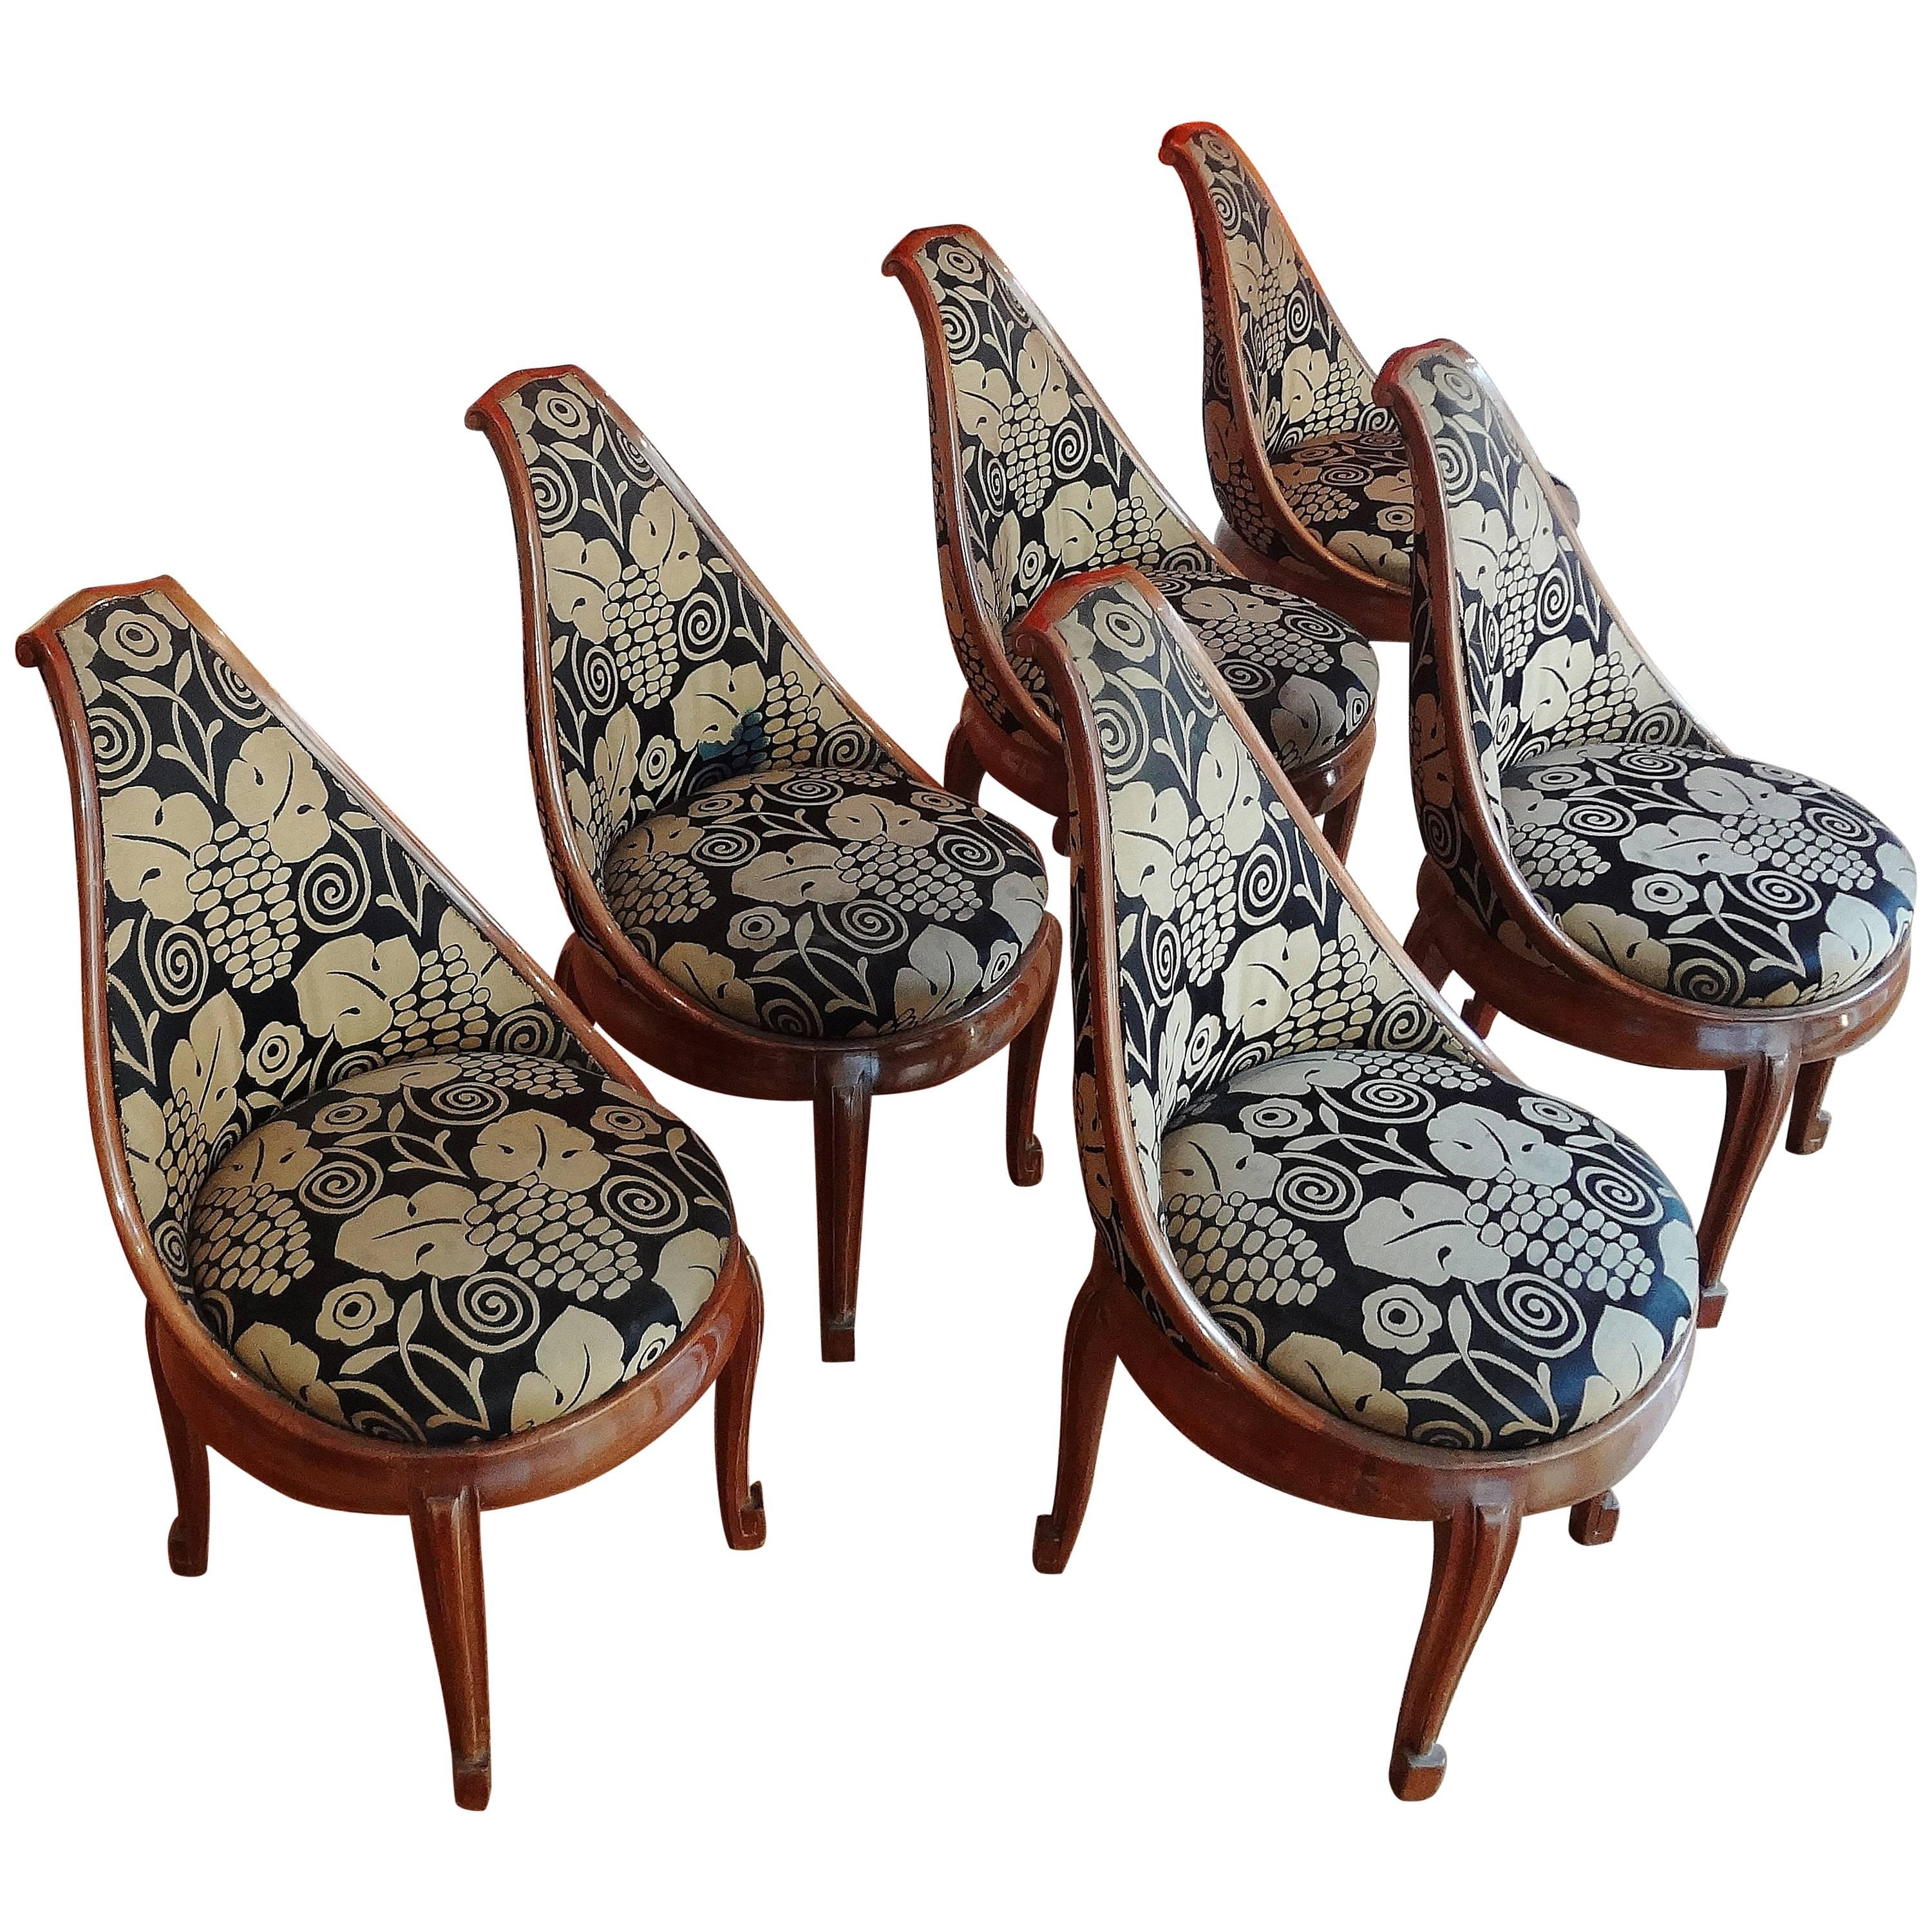 Set of Six Mahogany Chairs by Sue et Mare, 1925